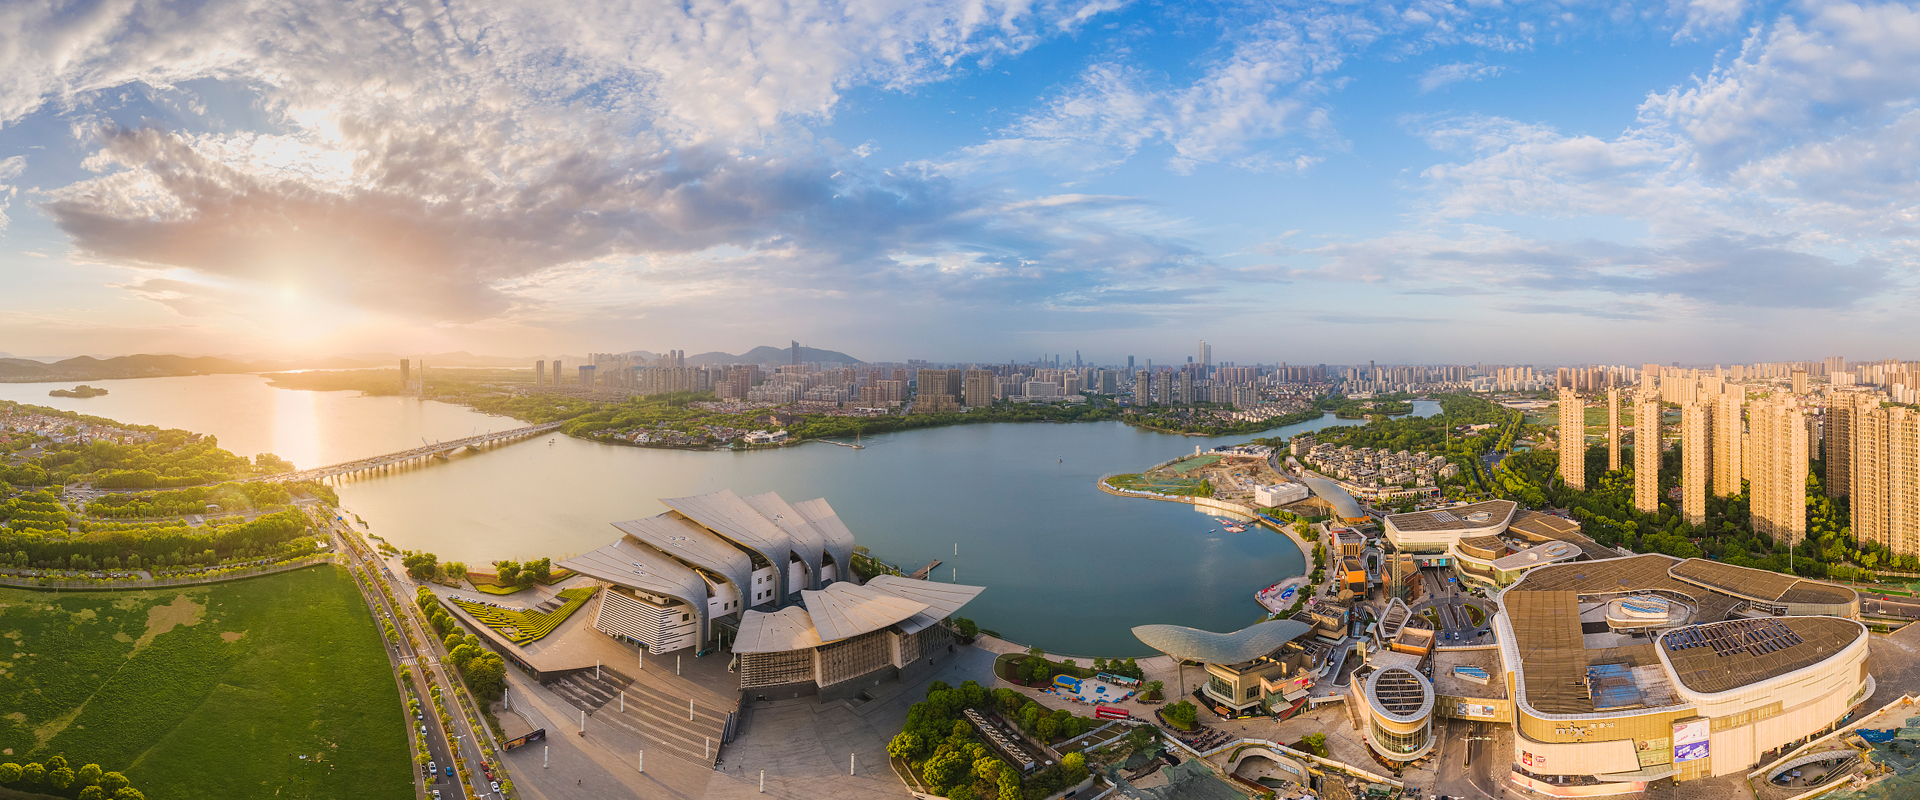 Wuxi's landscape captured in photos